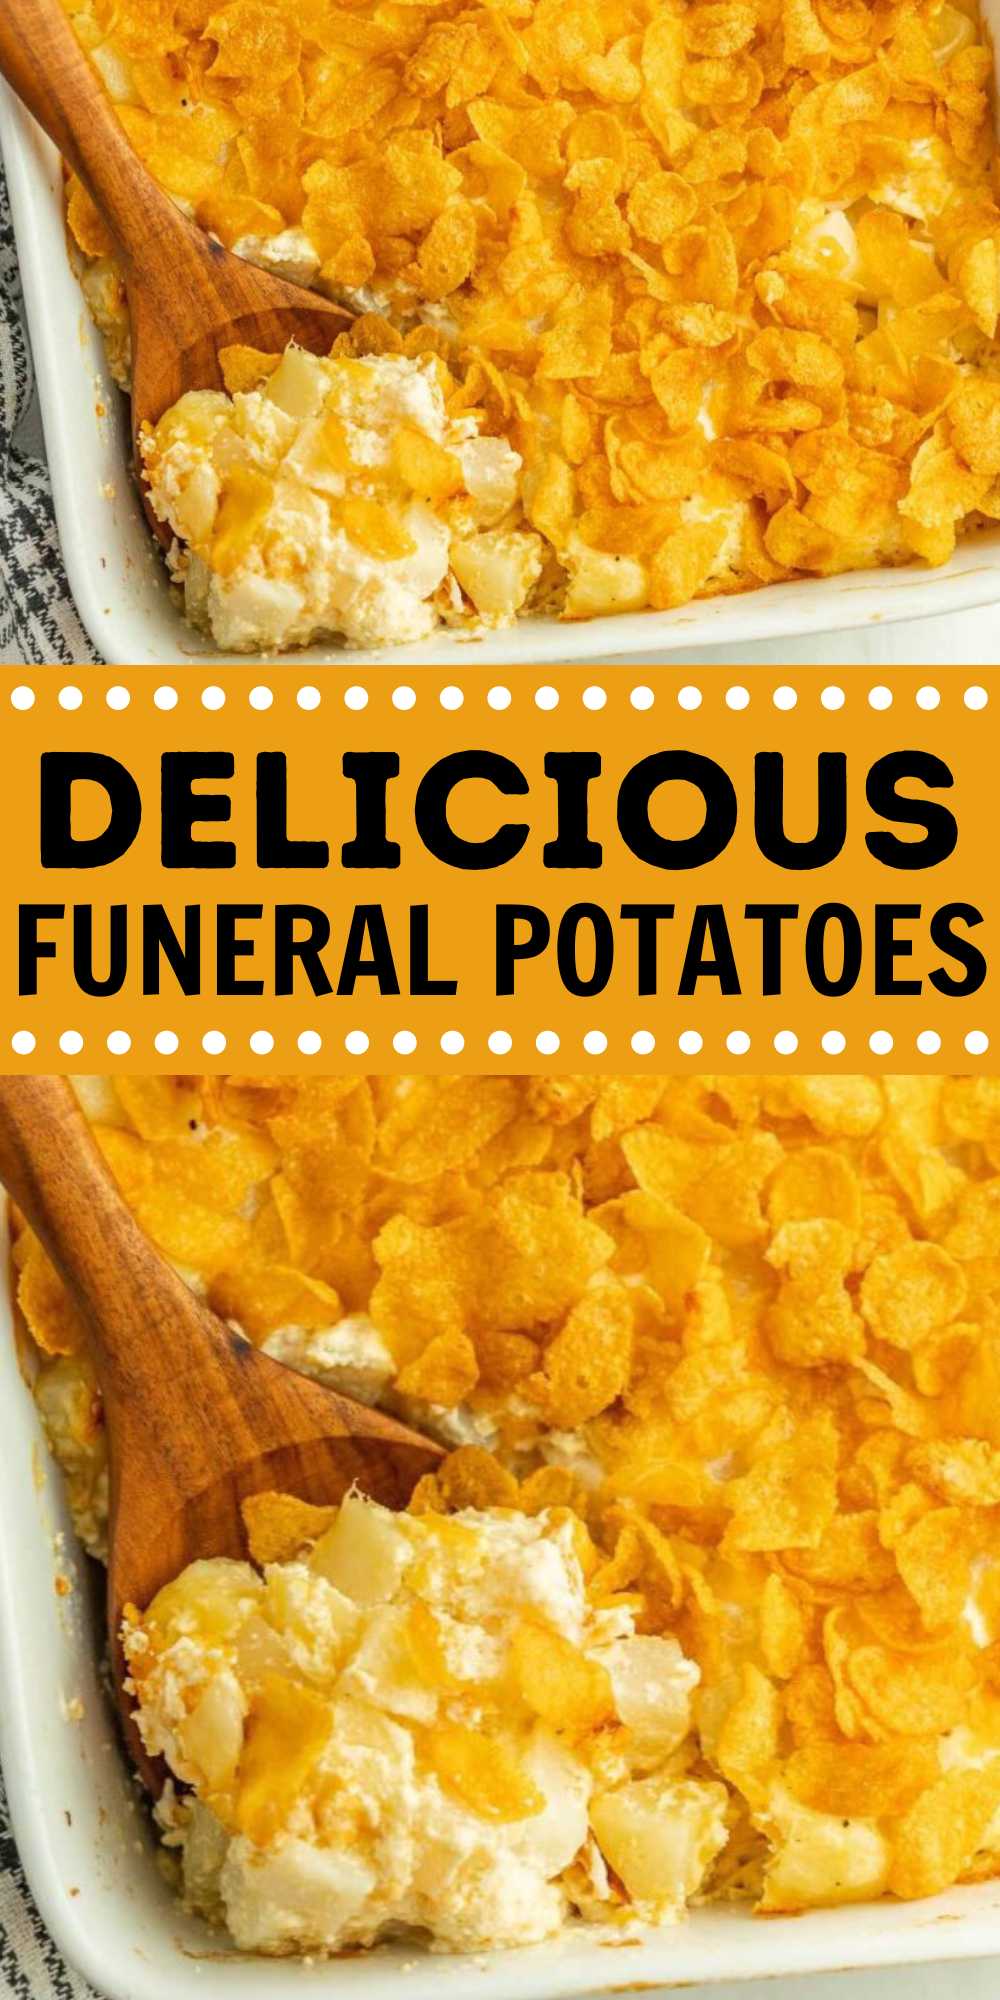 Funeral Potatoes Recipe is the perfect comfort food. Perfect for family gatherings or Thanksgiving. This cheesy potatoes are easy to make. All you need is a few simple ingredients and everything bakes perfectly in a baking dish or casserole dish. Serve with ham, turkey or any type of grilled meats. #eatingonadime #funeralpotatoes #cheesypotatoes